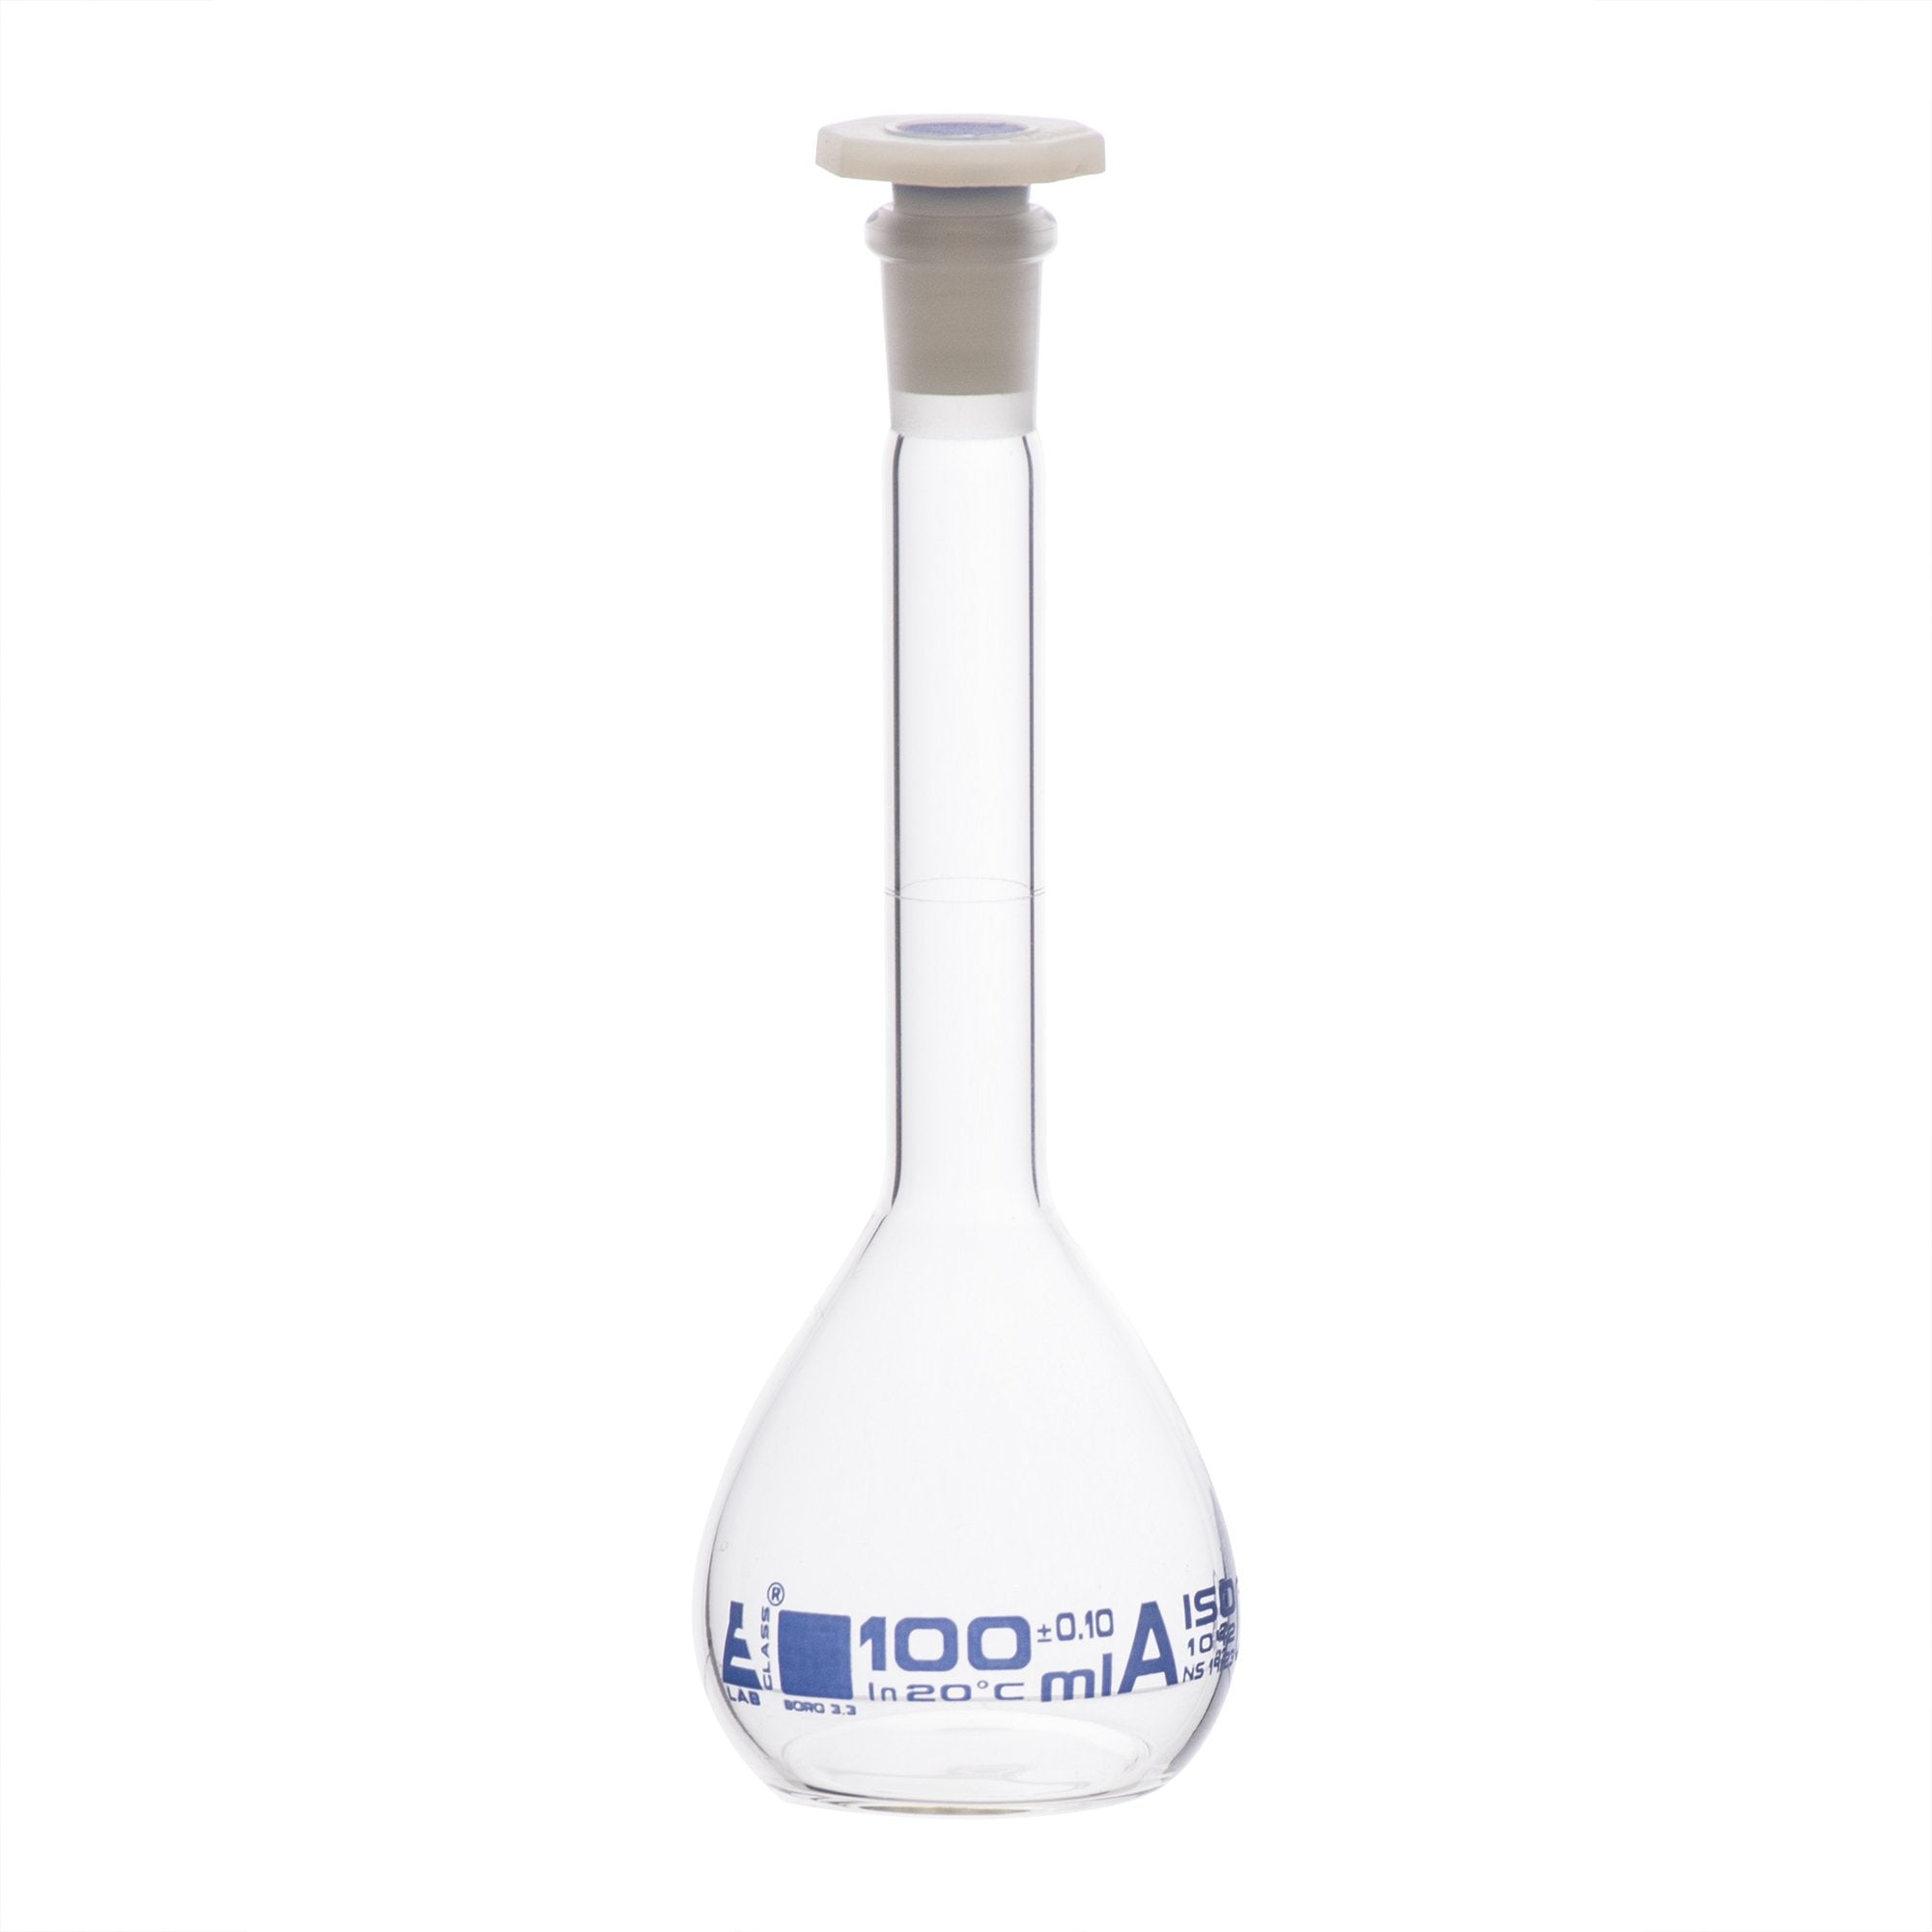 Borosilicate Glass Volumetric Flask with Polypropylene Stopper, 100 ml, Class A with Individual Work Certificate, Pack of 2,  Autoclavable